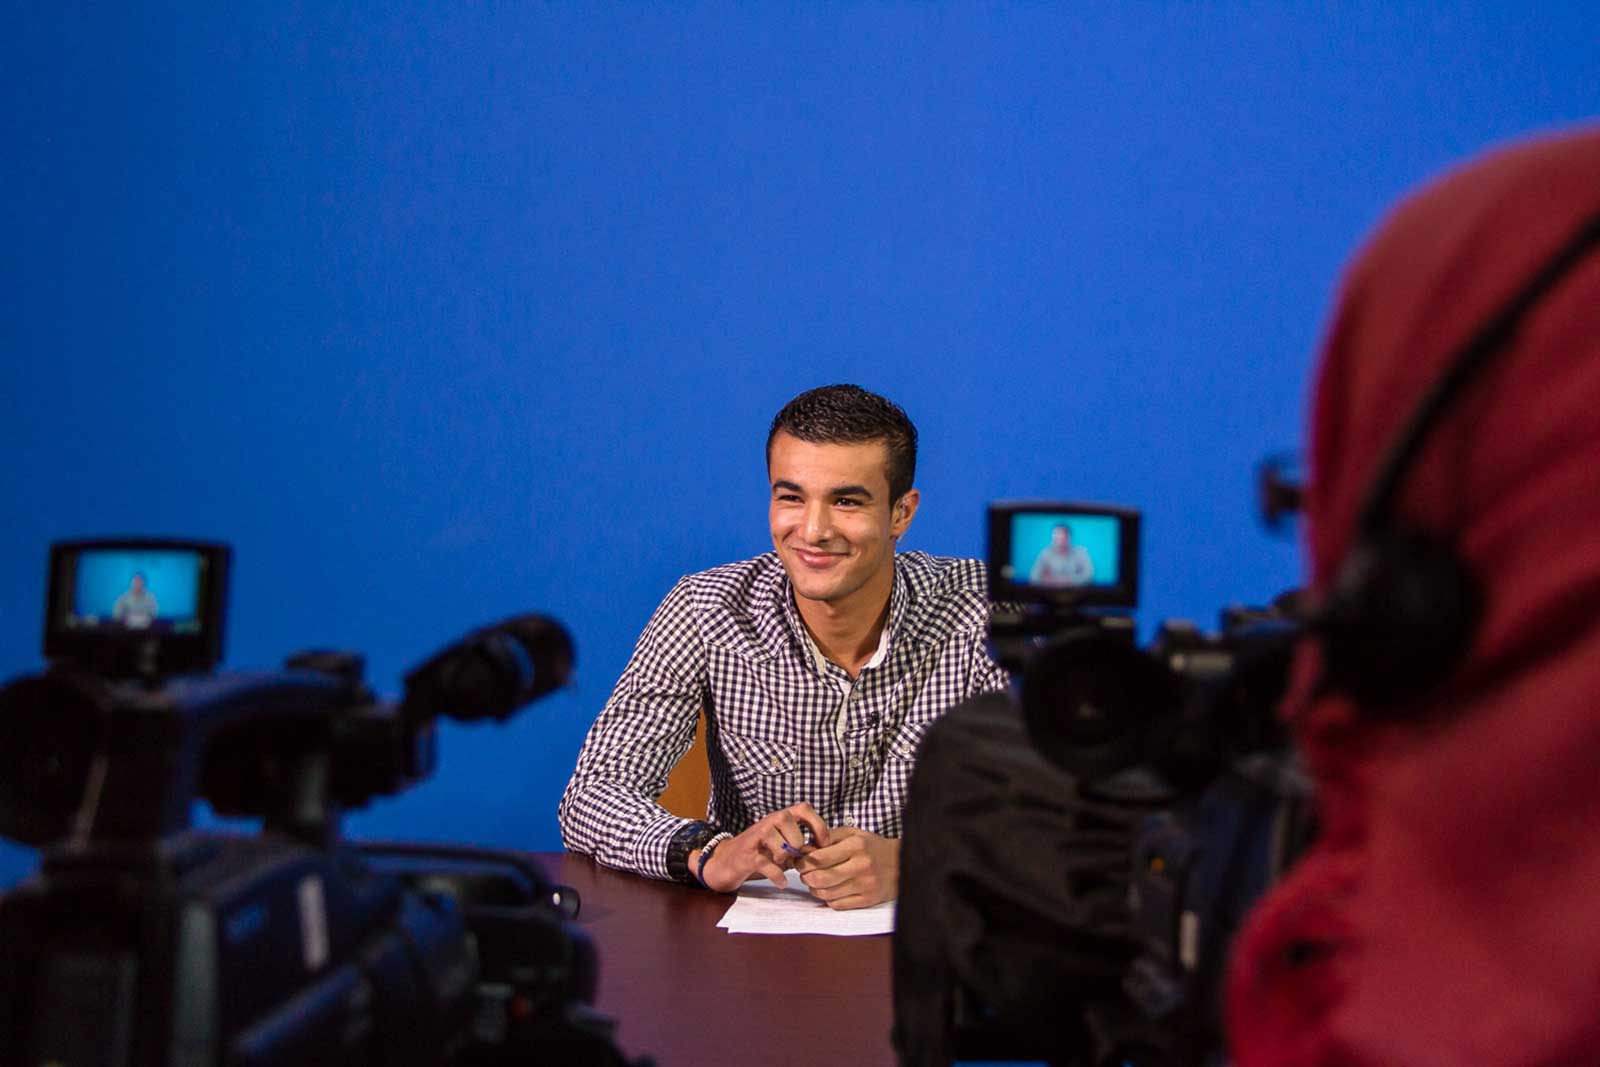 IWPR trainees producing a TV news segment as part of course at The University of Tripoli Media Lab, March 2014. © IWPR